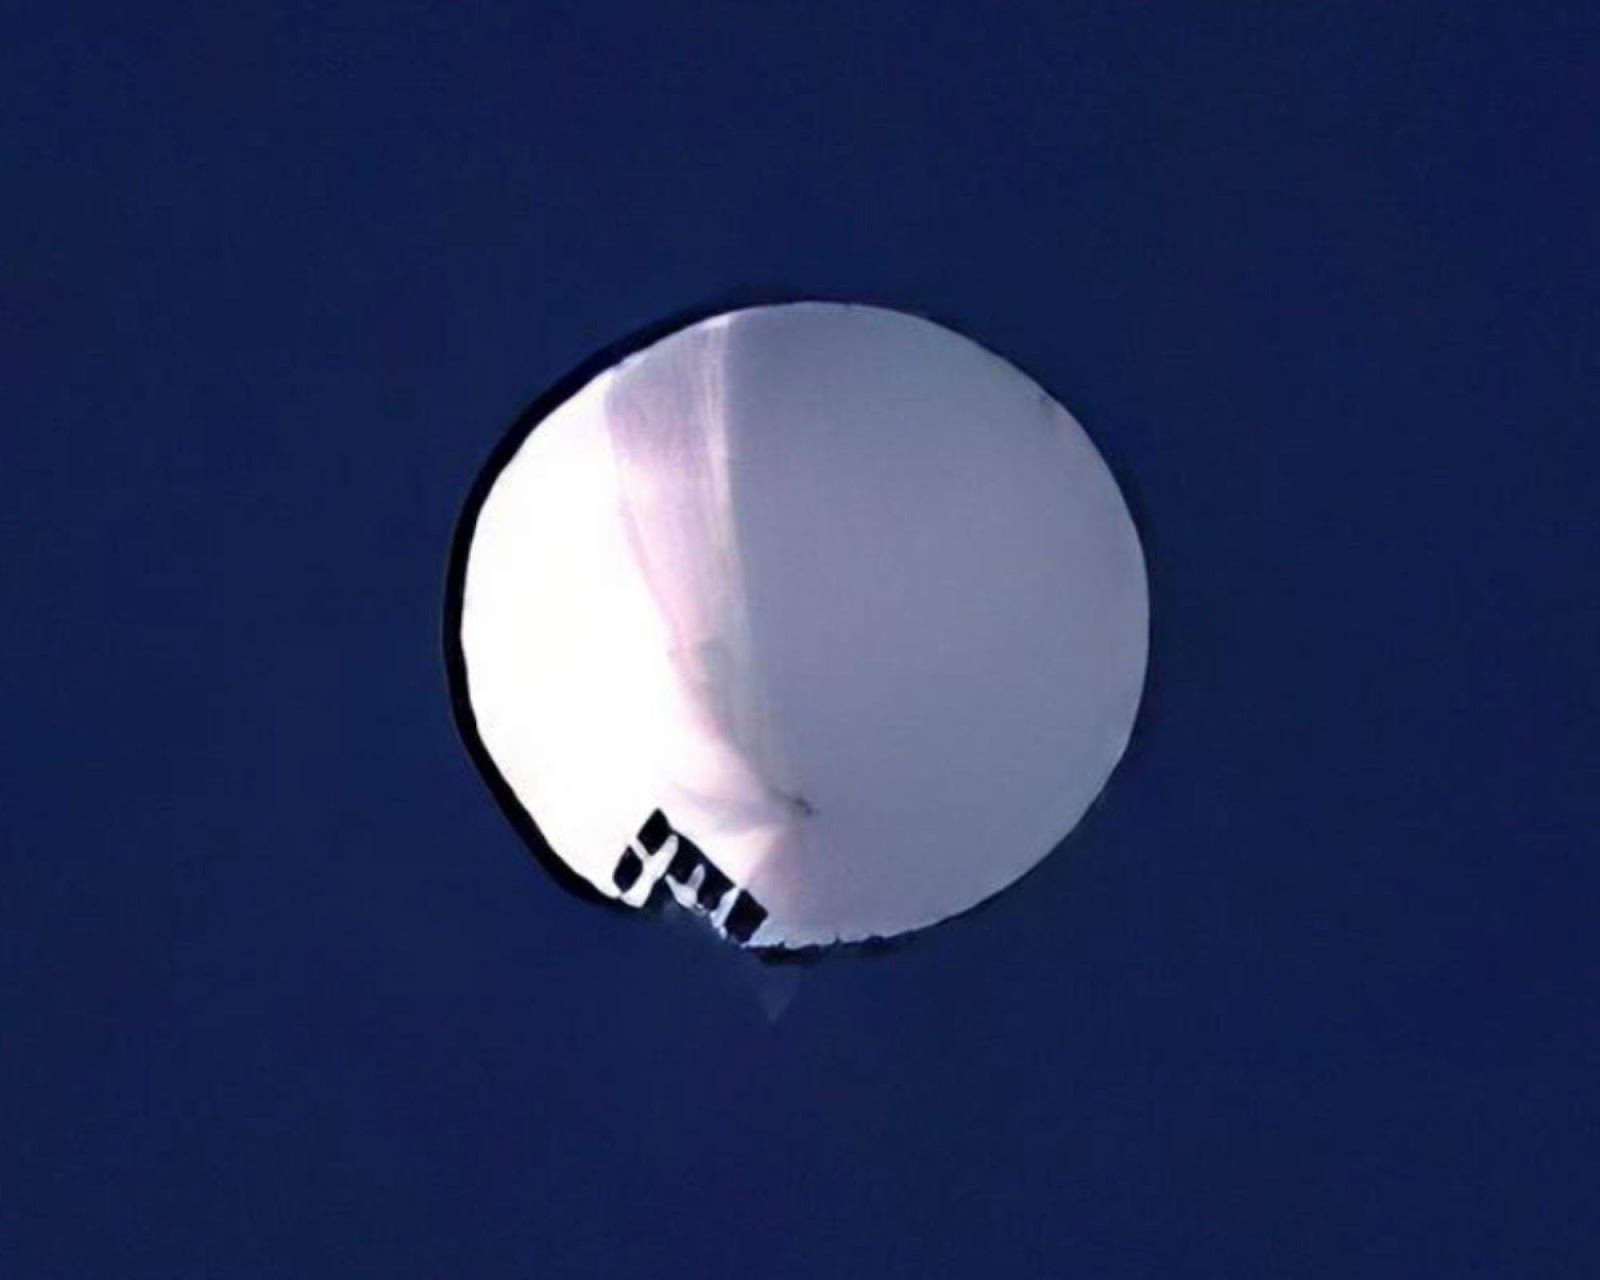 Spy balloon sent from China to the US